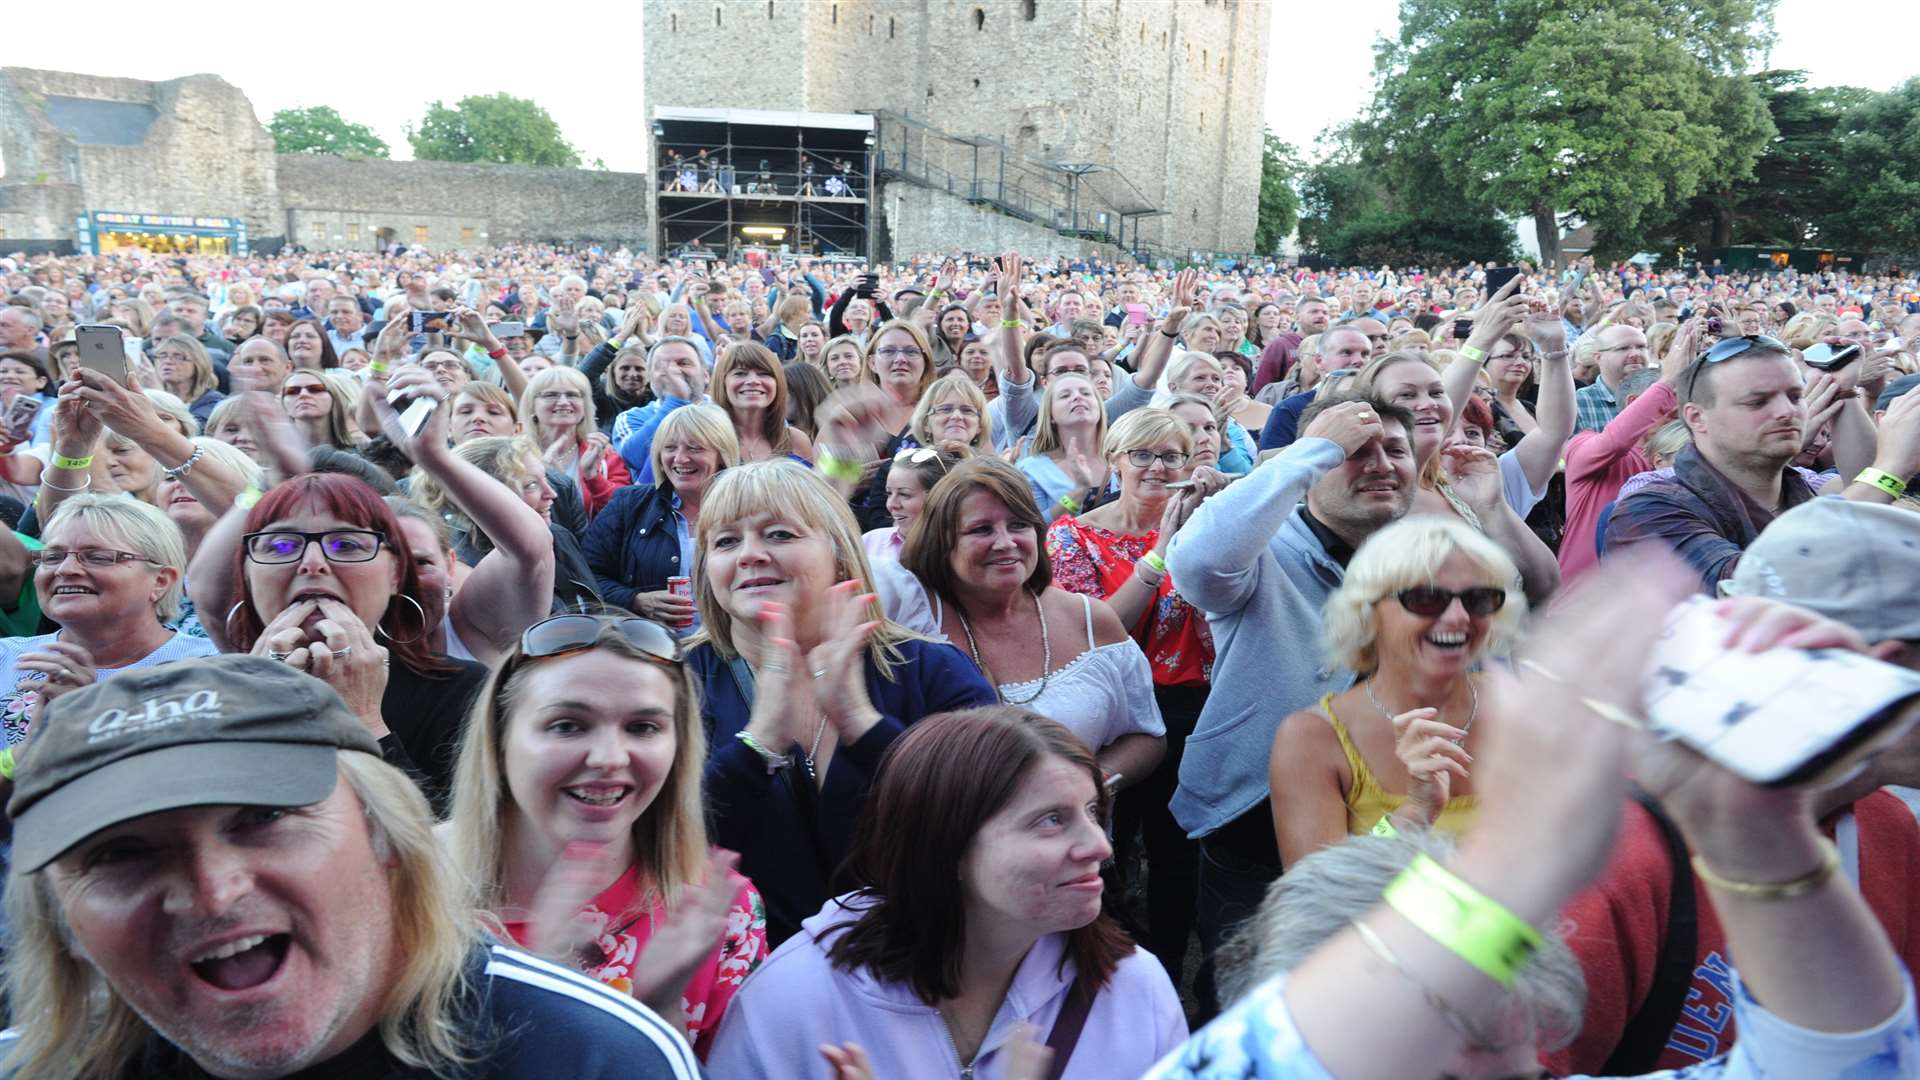 The crowds at Rochester Castle